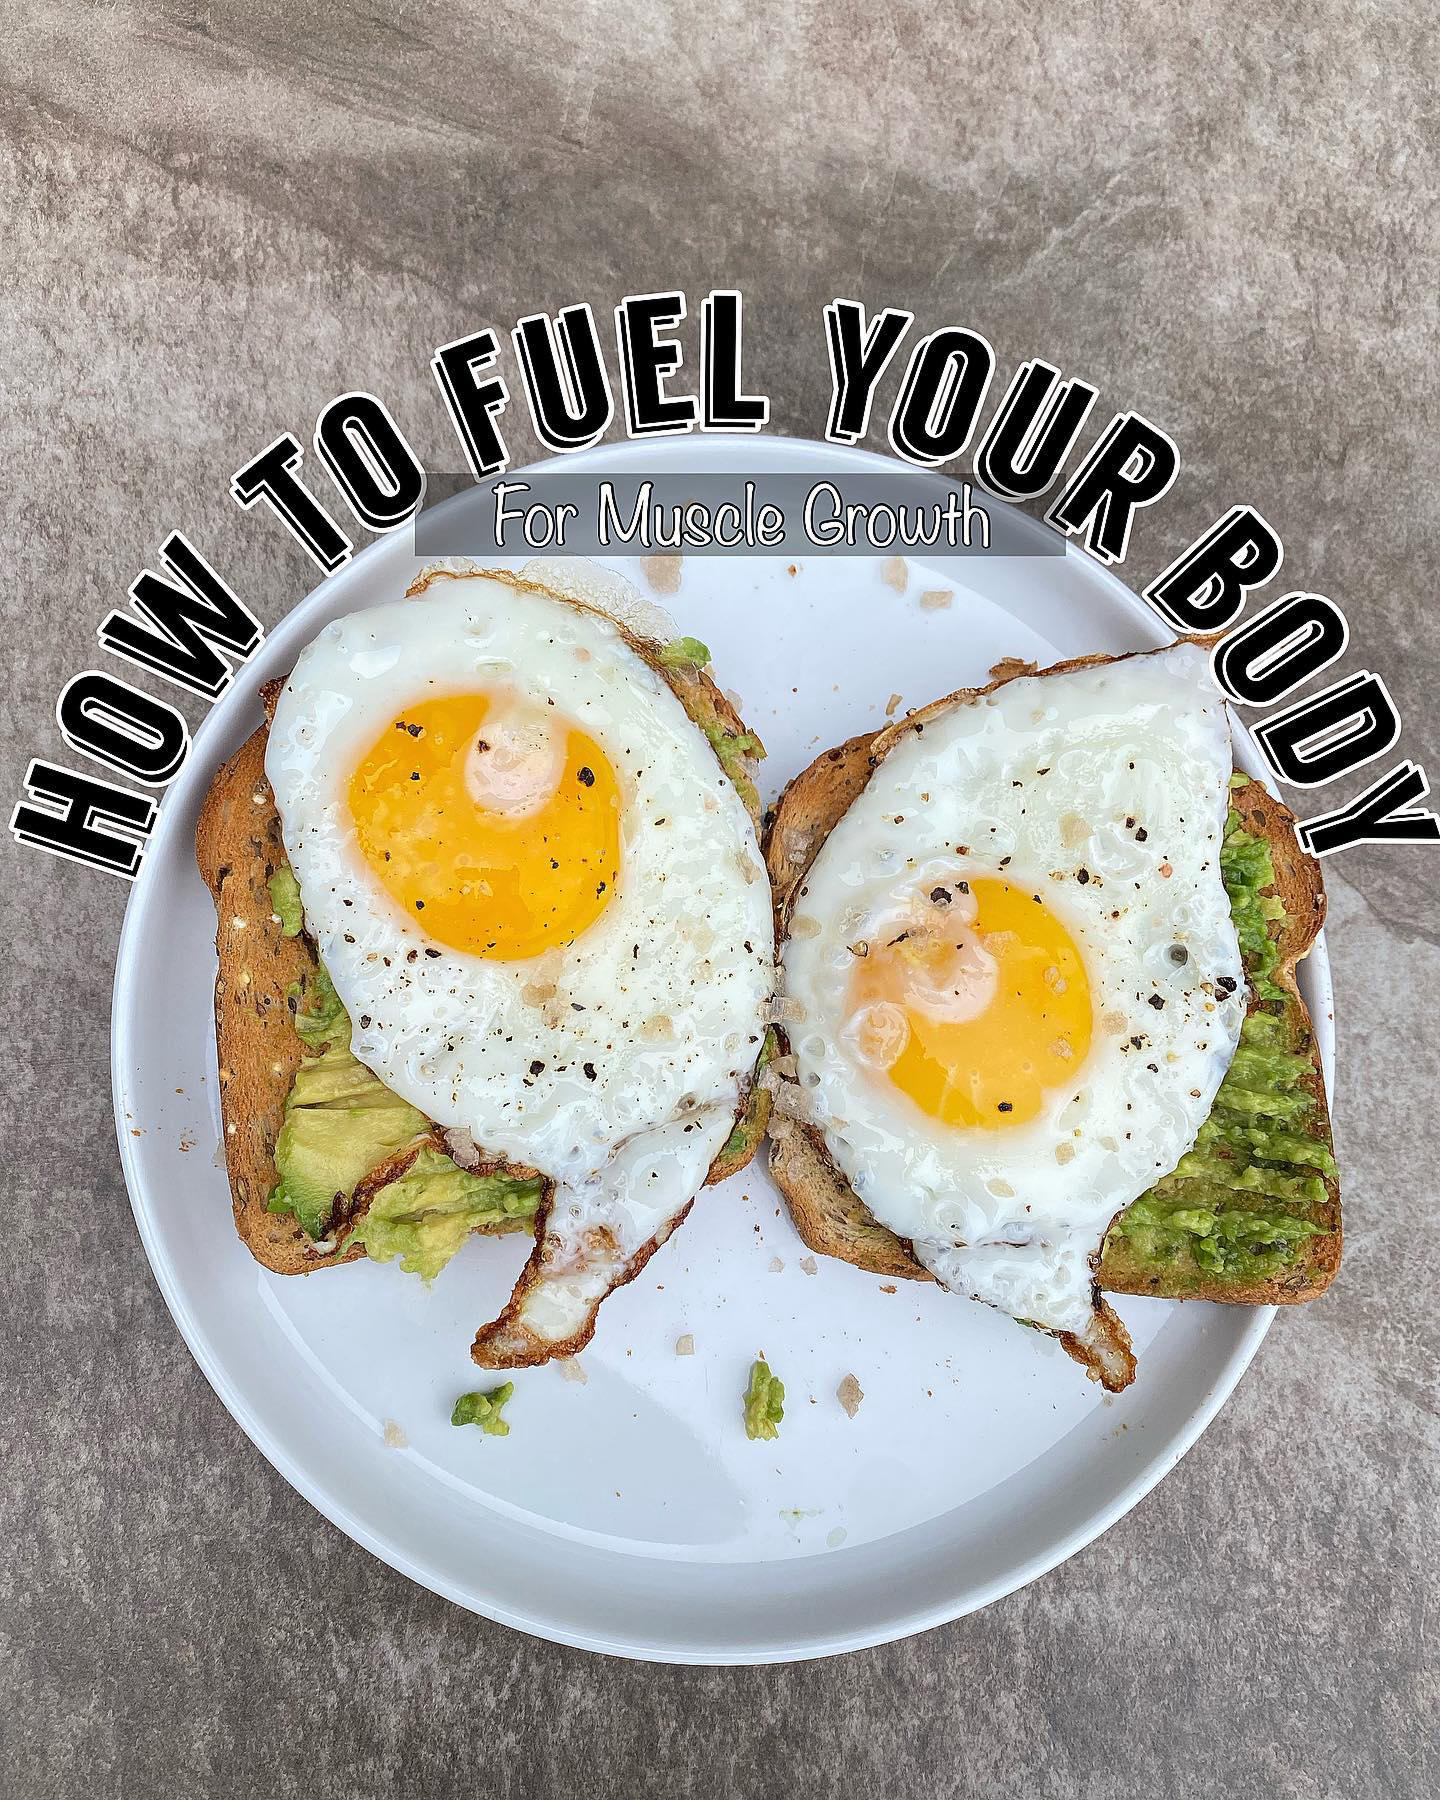 EMMA | PERSONAL TRAINER - HOW TO FUEL YOUR BODY